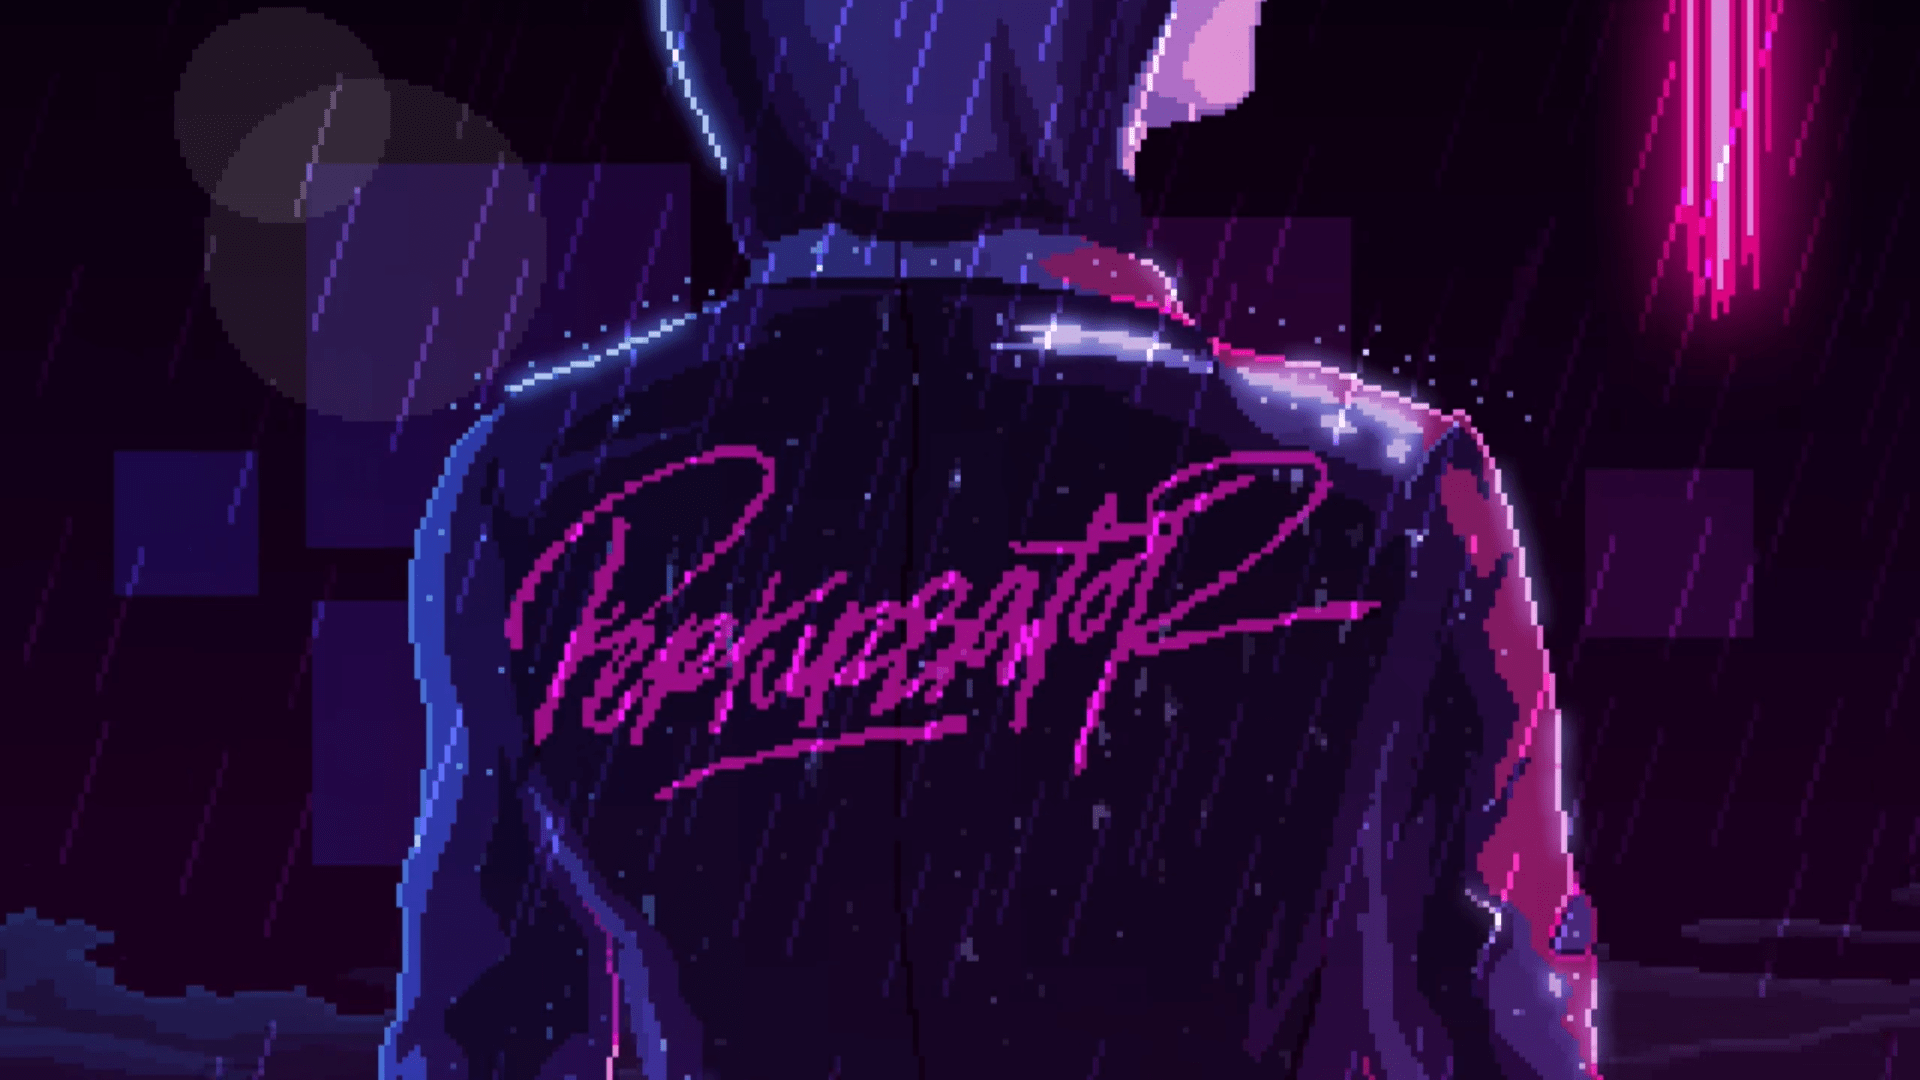 A cyberpunk wallpaper with a neon sign on a jacket - Synthwave